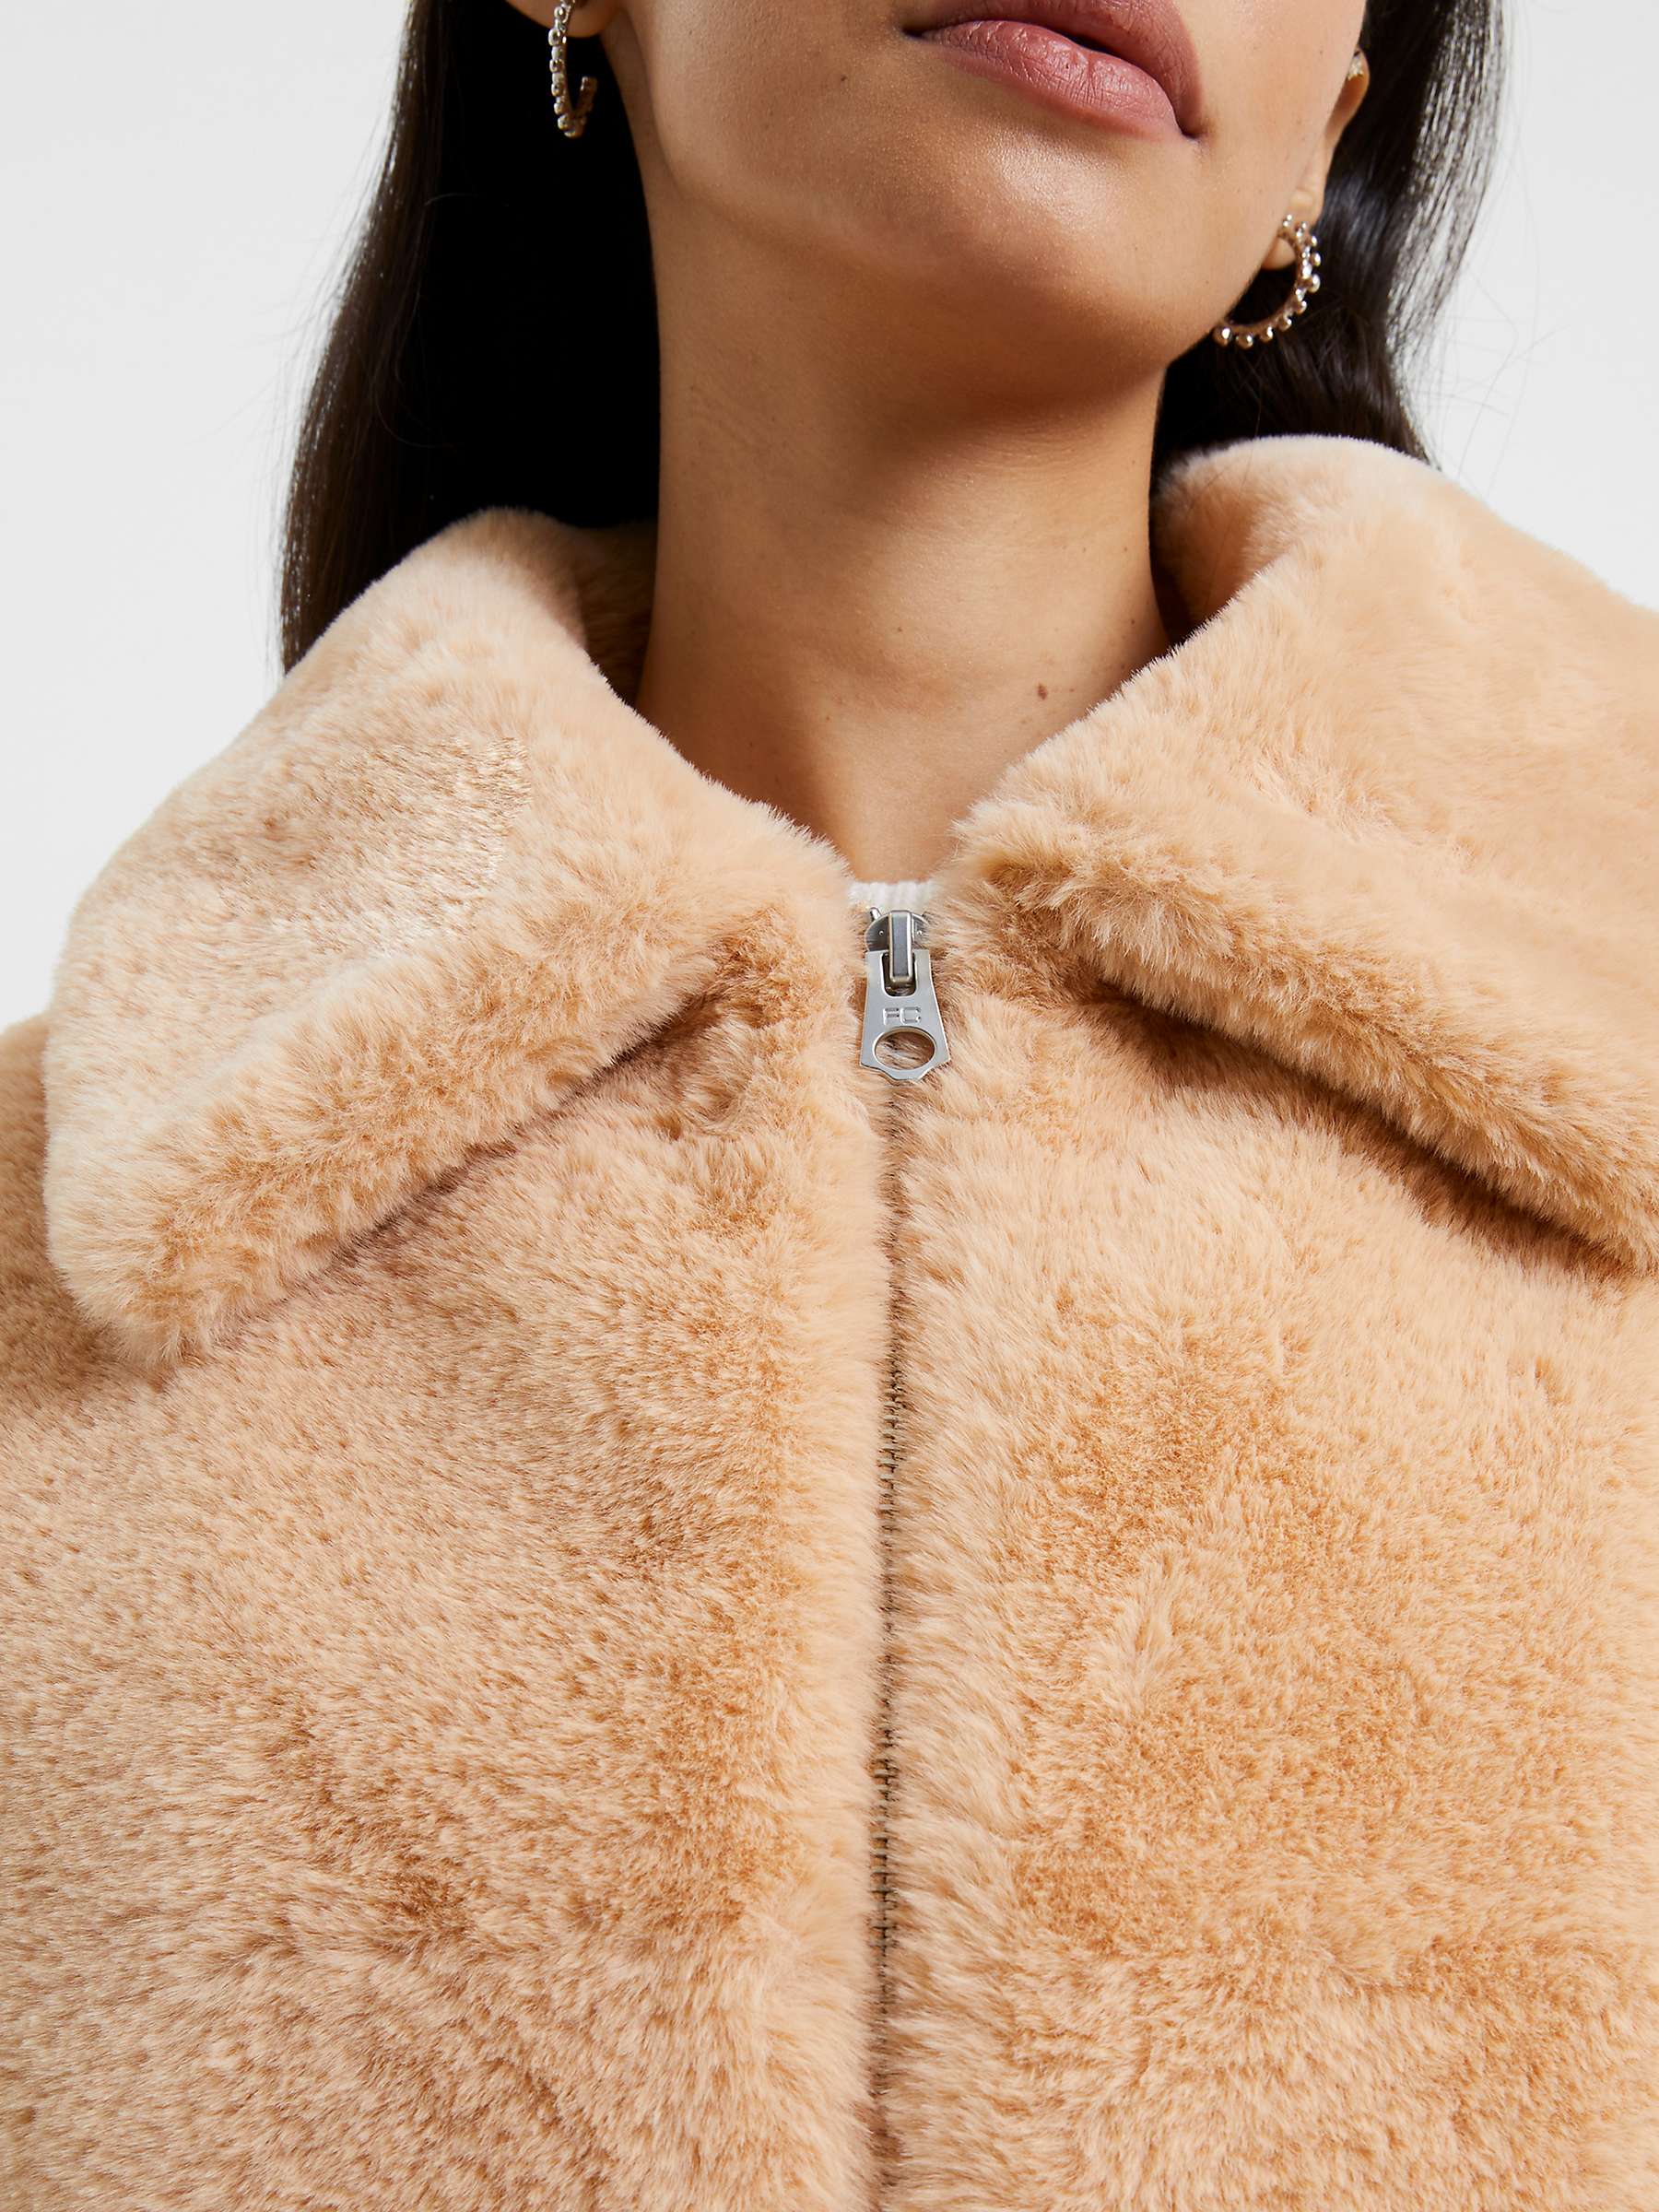 Buy French Connection Avi Iren Faux Fur Jacket, Mid Brown Online at johnlewis.com